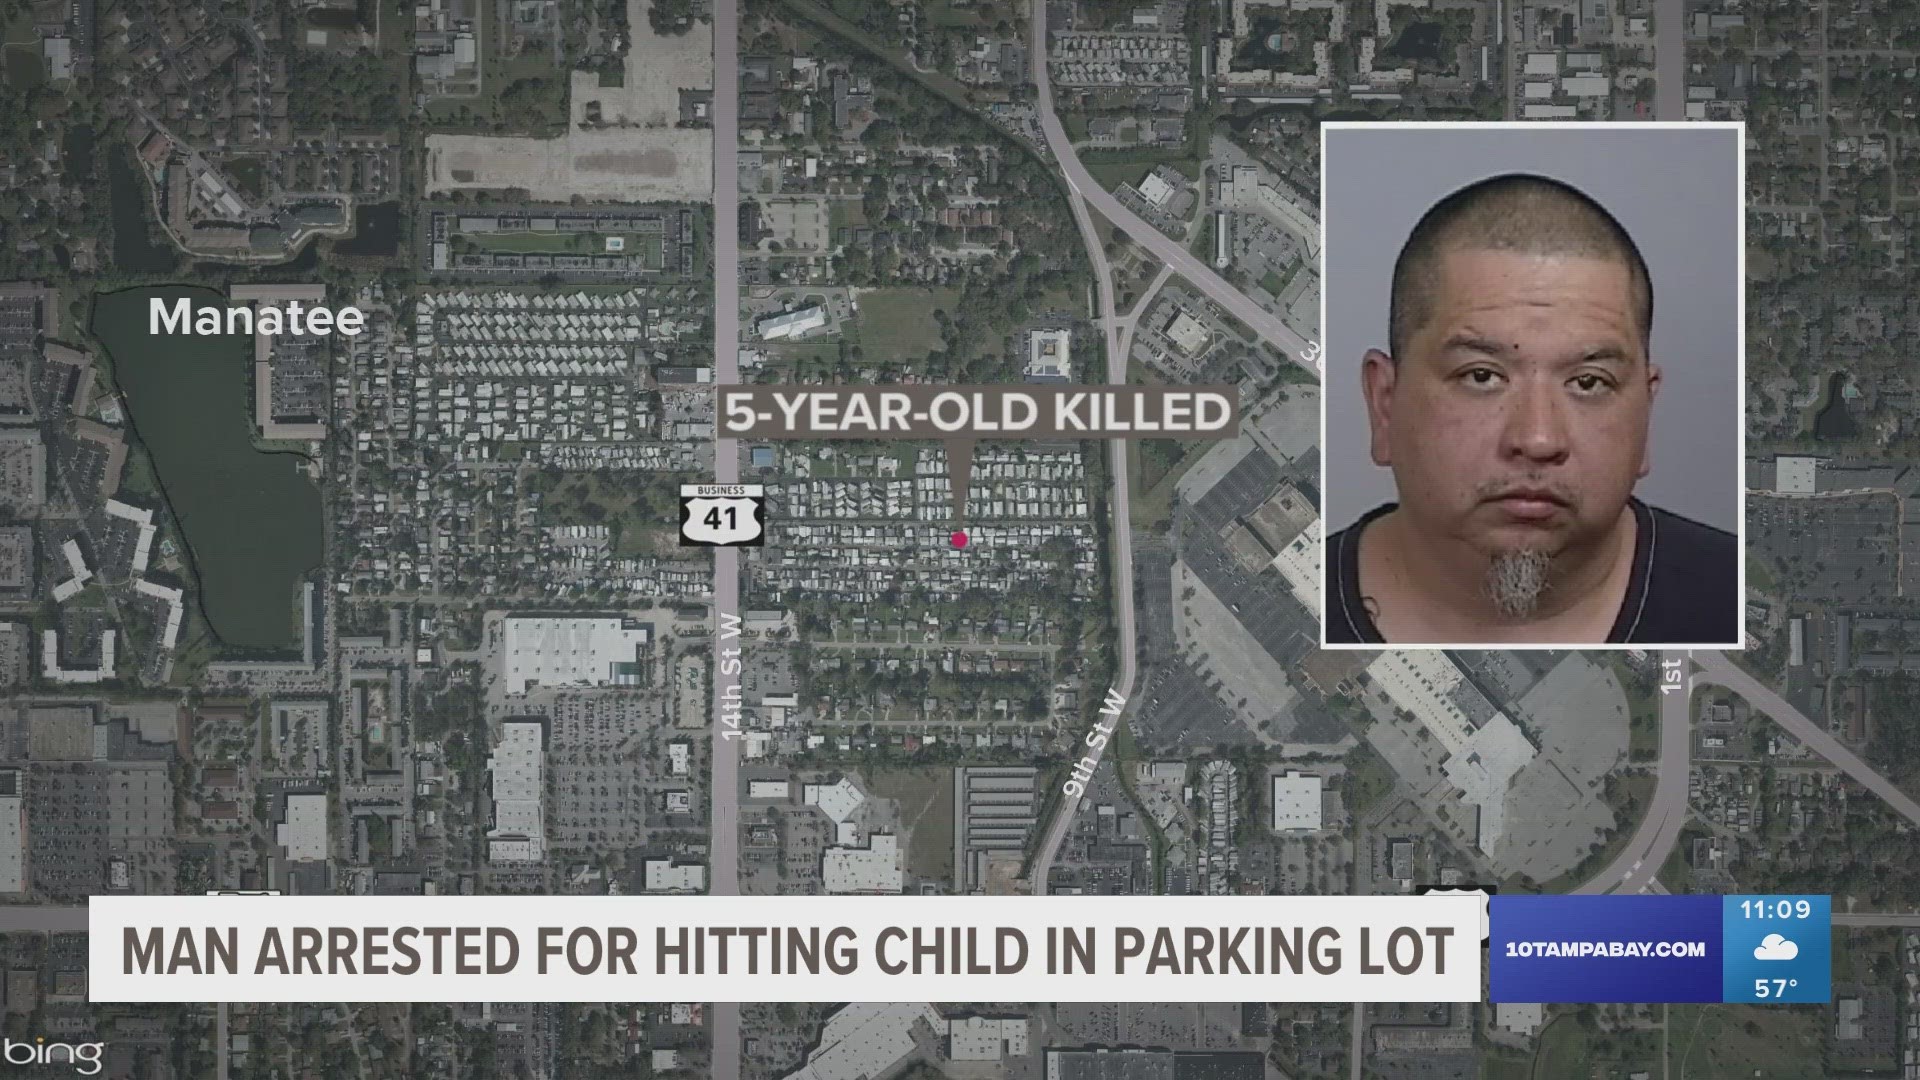 Man arrested for hitting child in parking loto